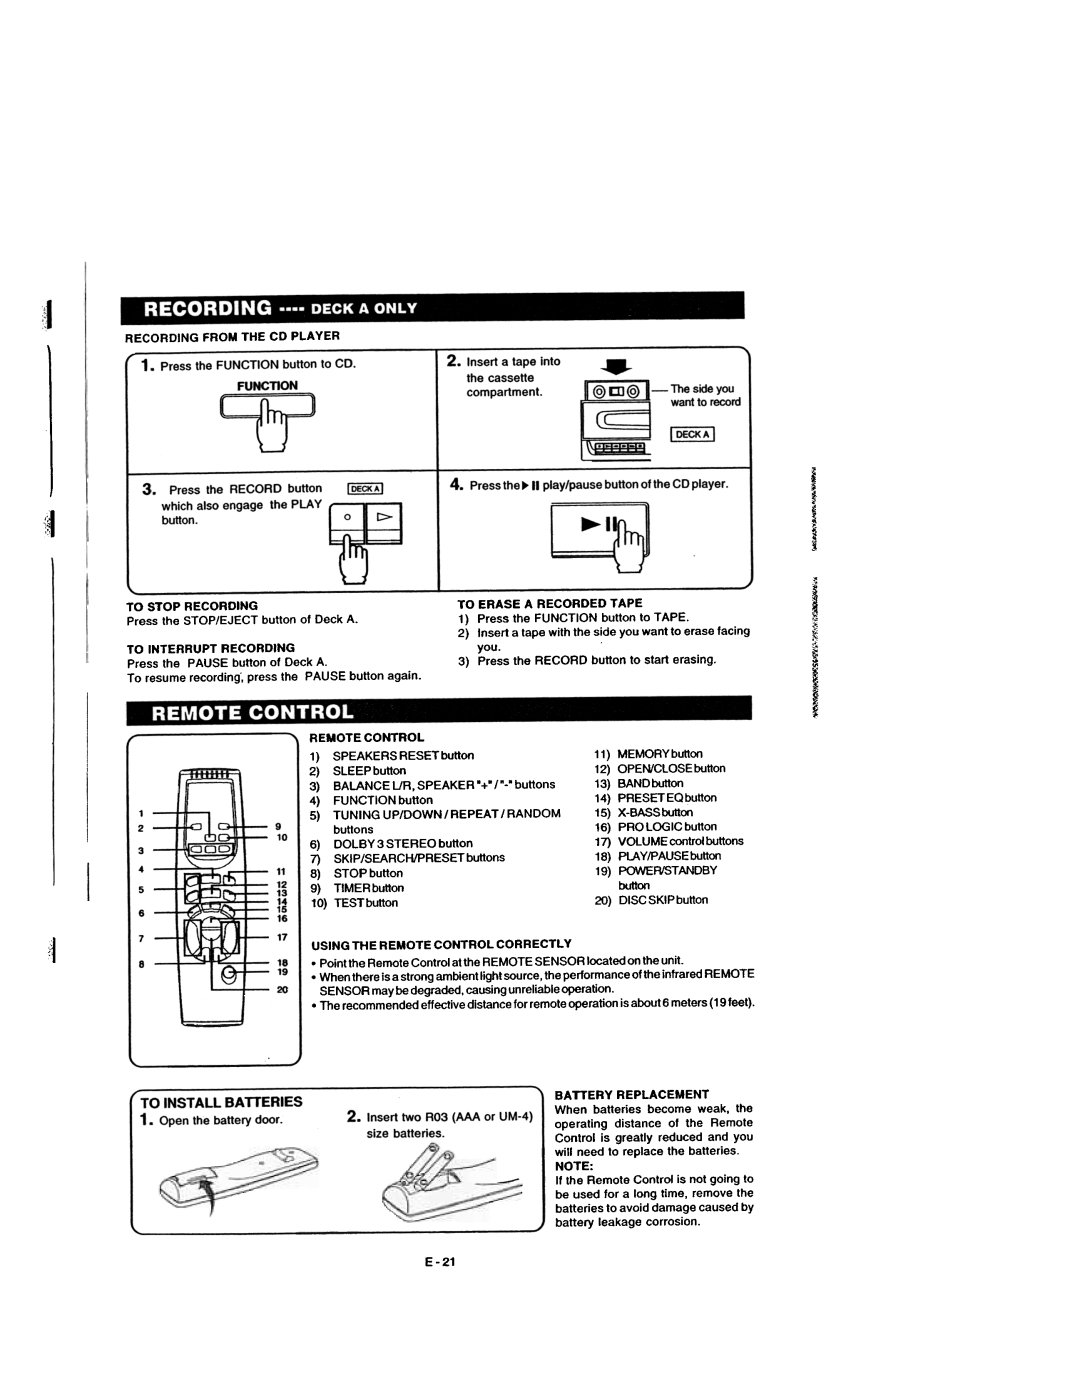 Dolby Laboratories CD Player manual TO INSTALL BATTERIES 1. Openthe batterydoor 